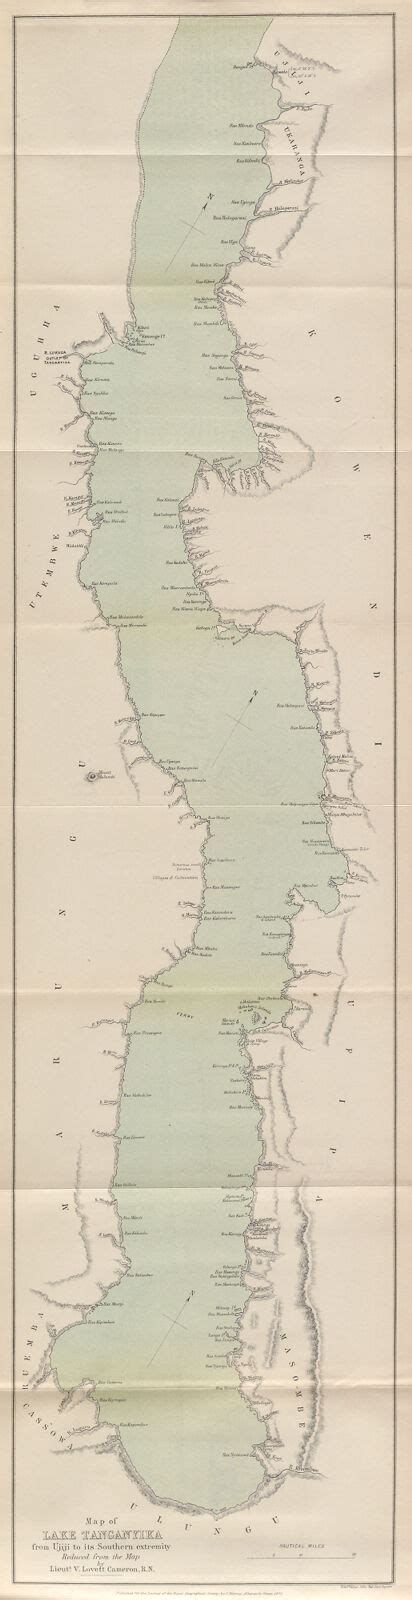 It is also the world's longest freshwater lake. Map of Lake Tanganyika from Ujiji to its Southern extremity | Digital Collections at the ...